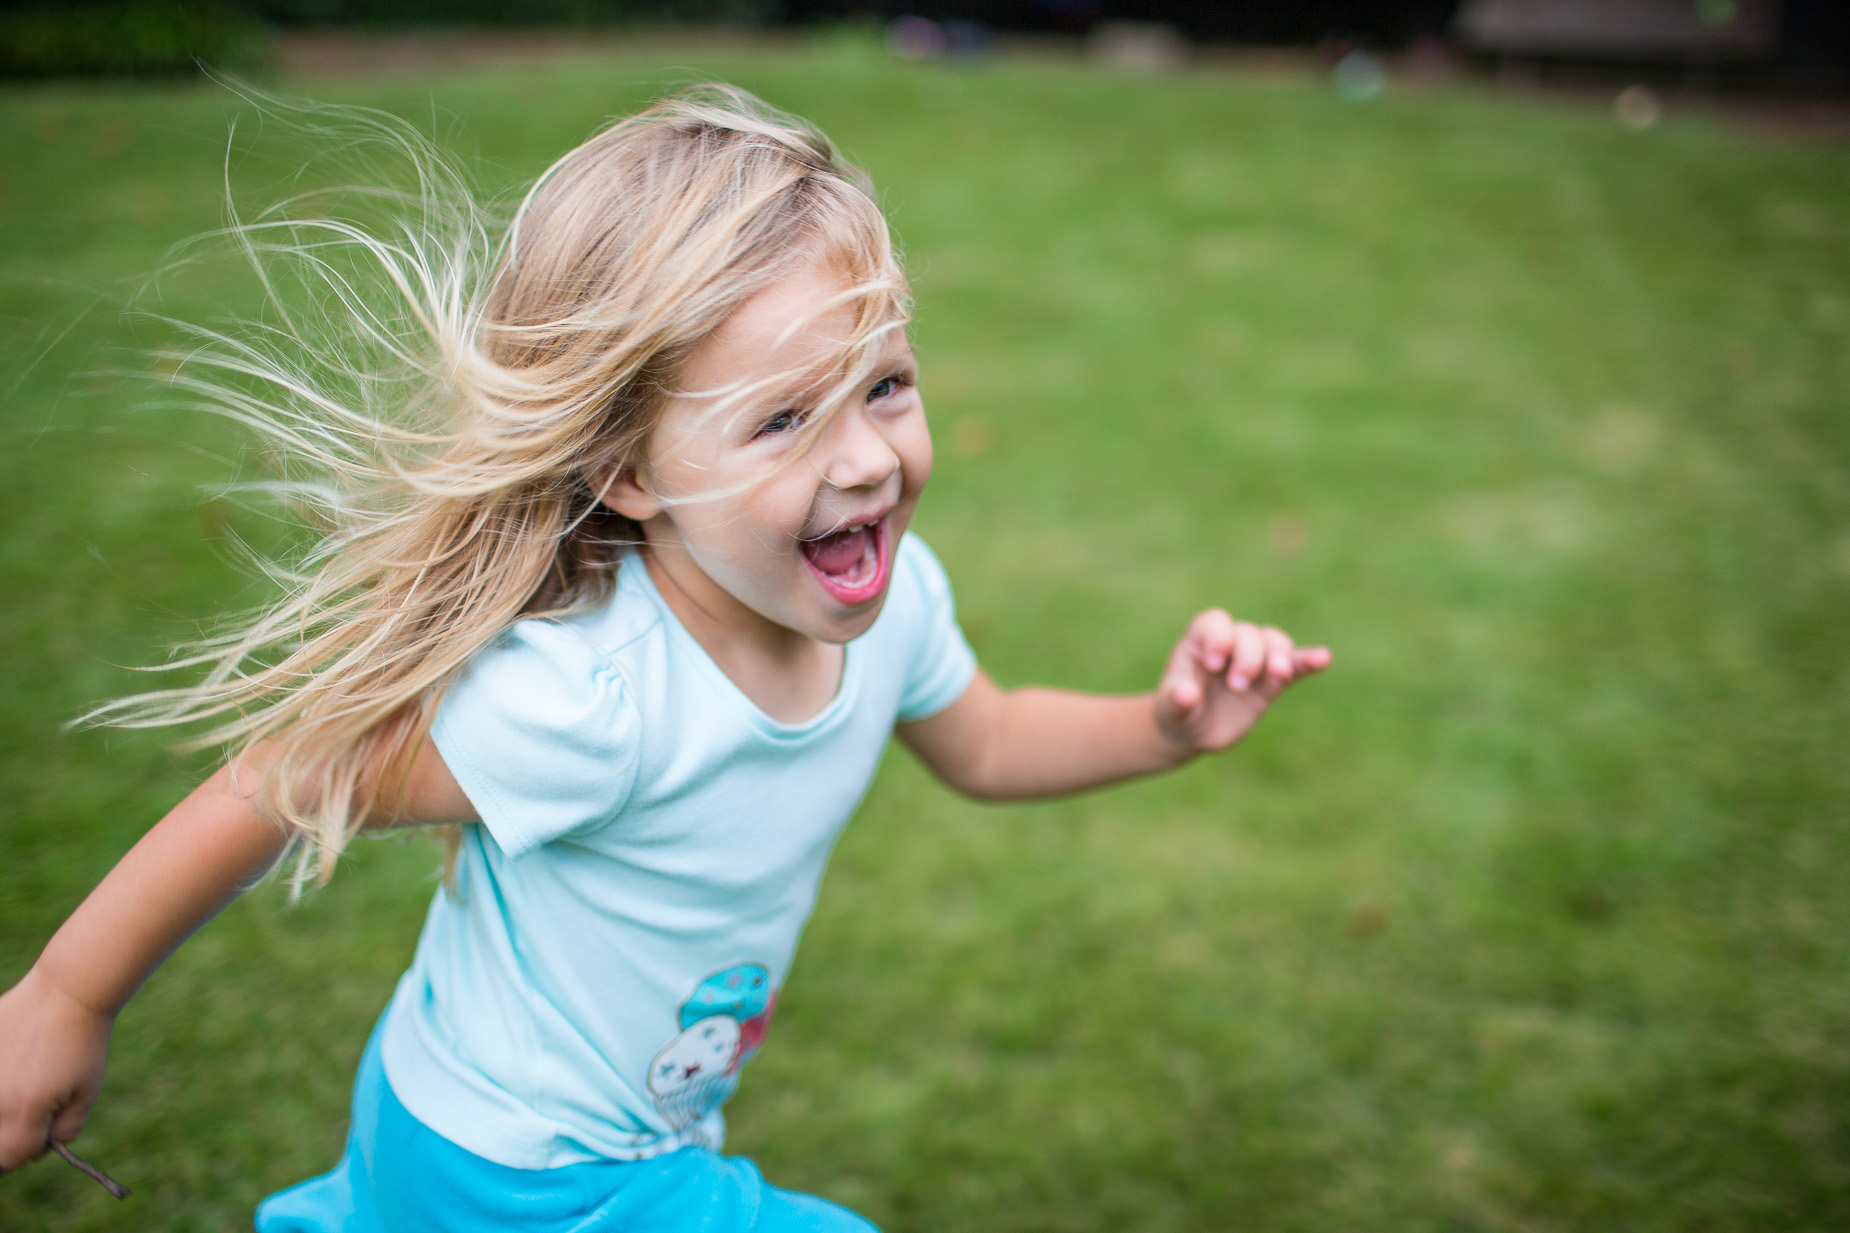 Girl Running in Grass by Atlanta Lifestyle Photographer